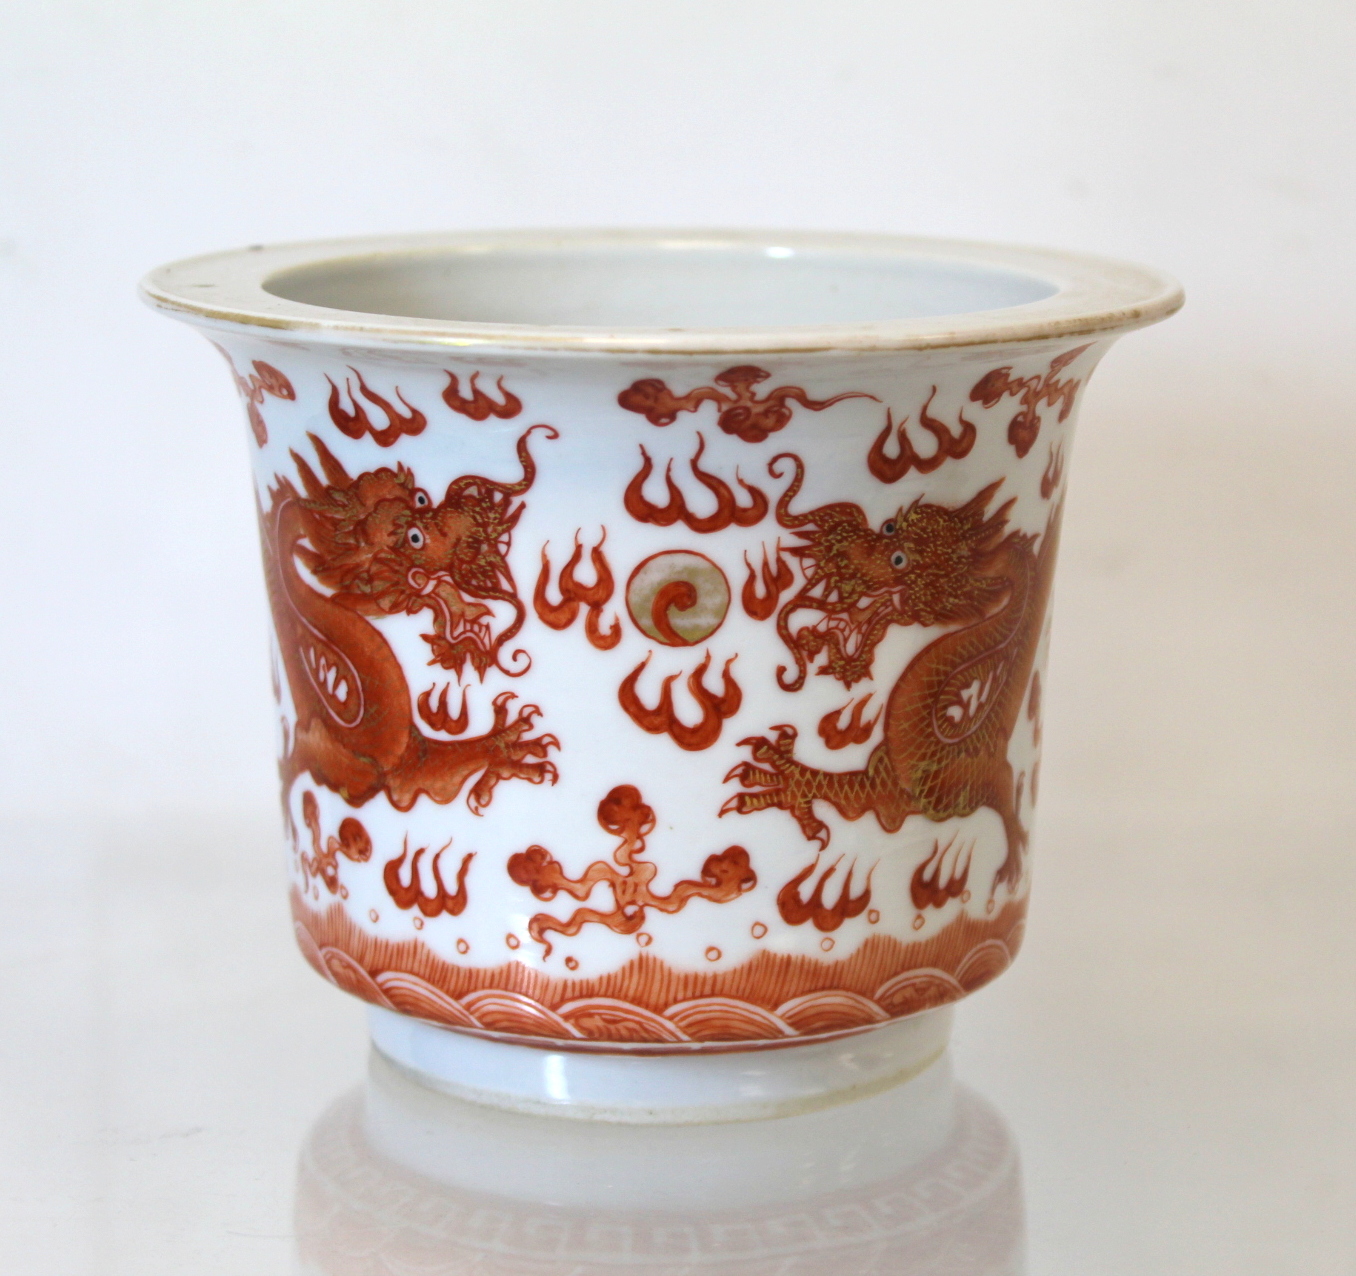 Small Chinese "Rouge de Fer" jardiniere or fern pot, decorated with dragons chasing flaming pearl.